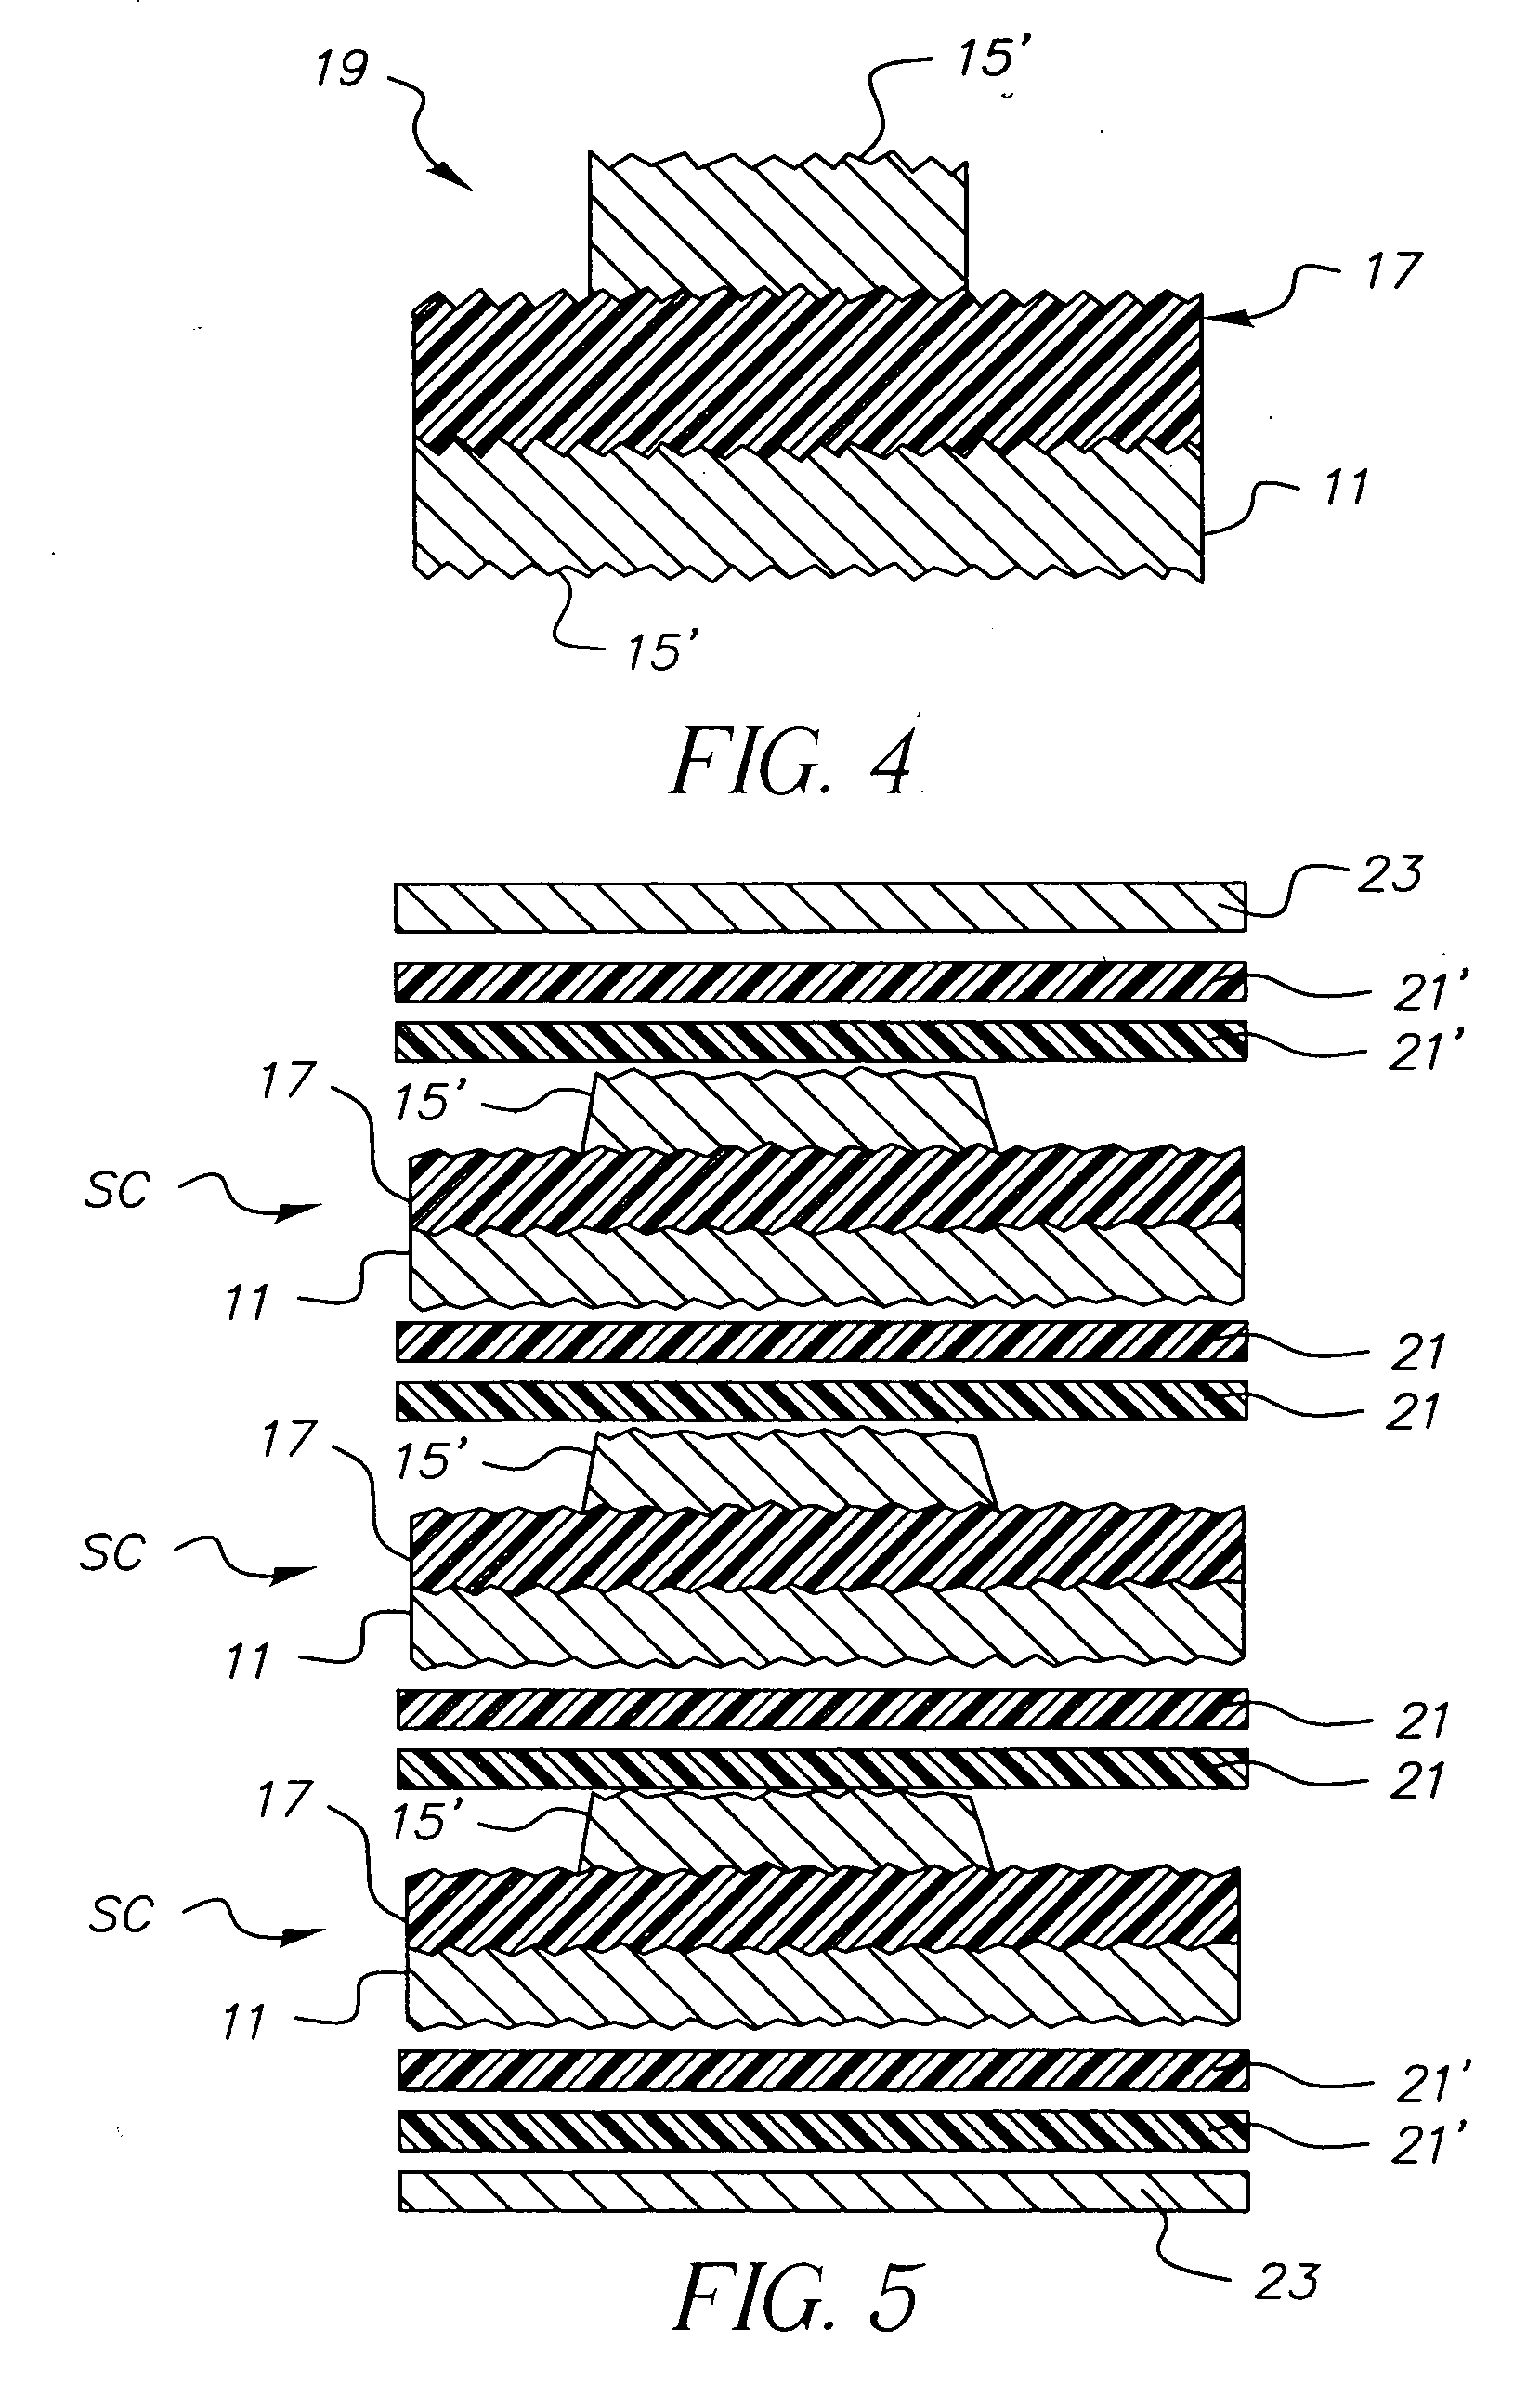 Circuitized substrates utilizing smooth-sided conductive layers as part thereof